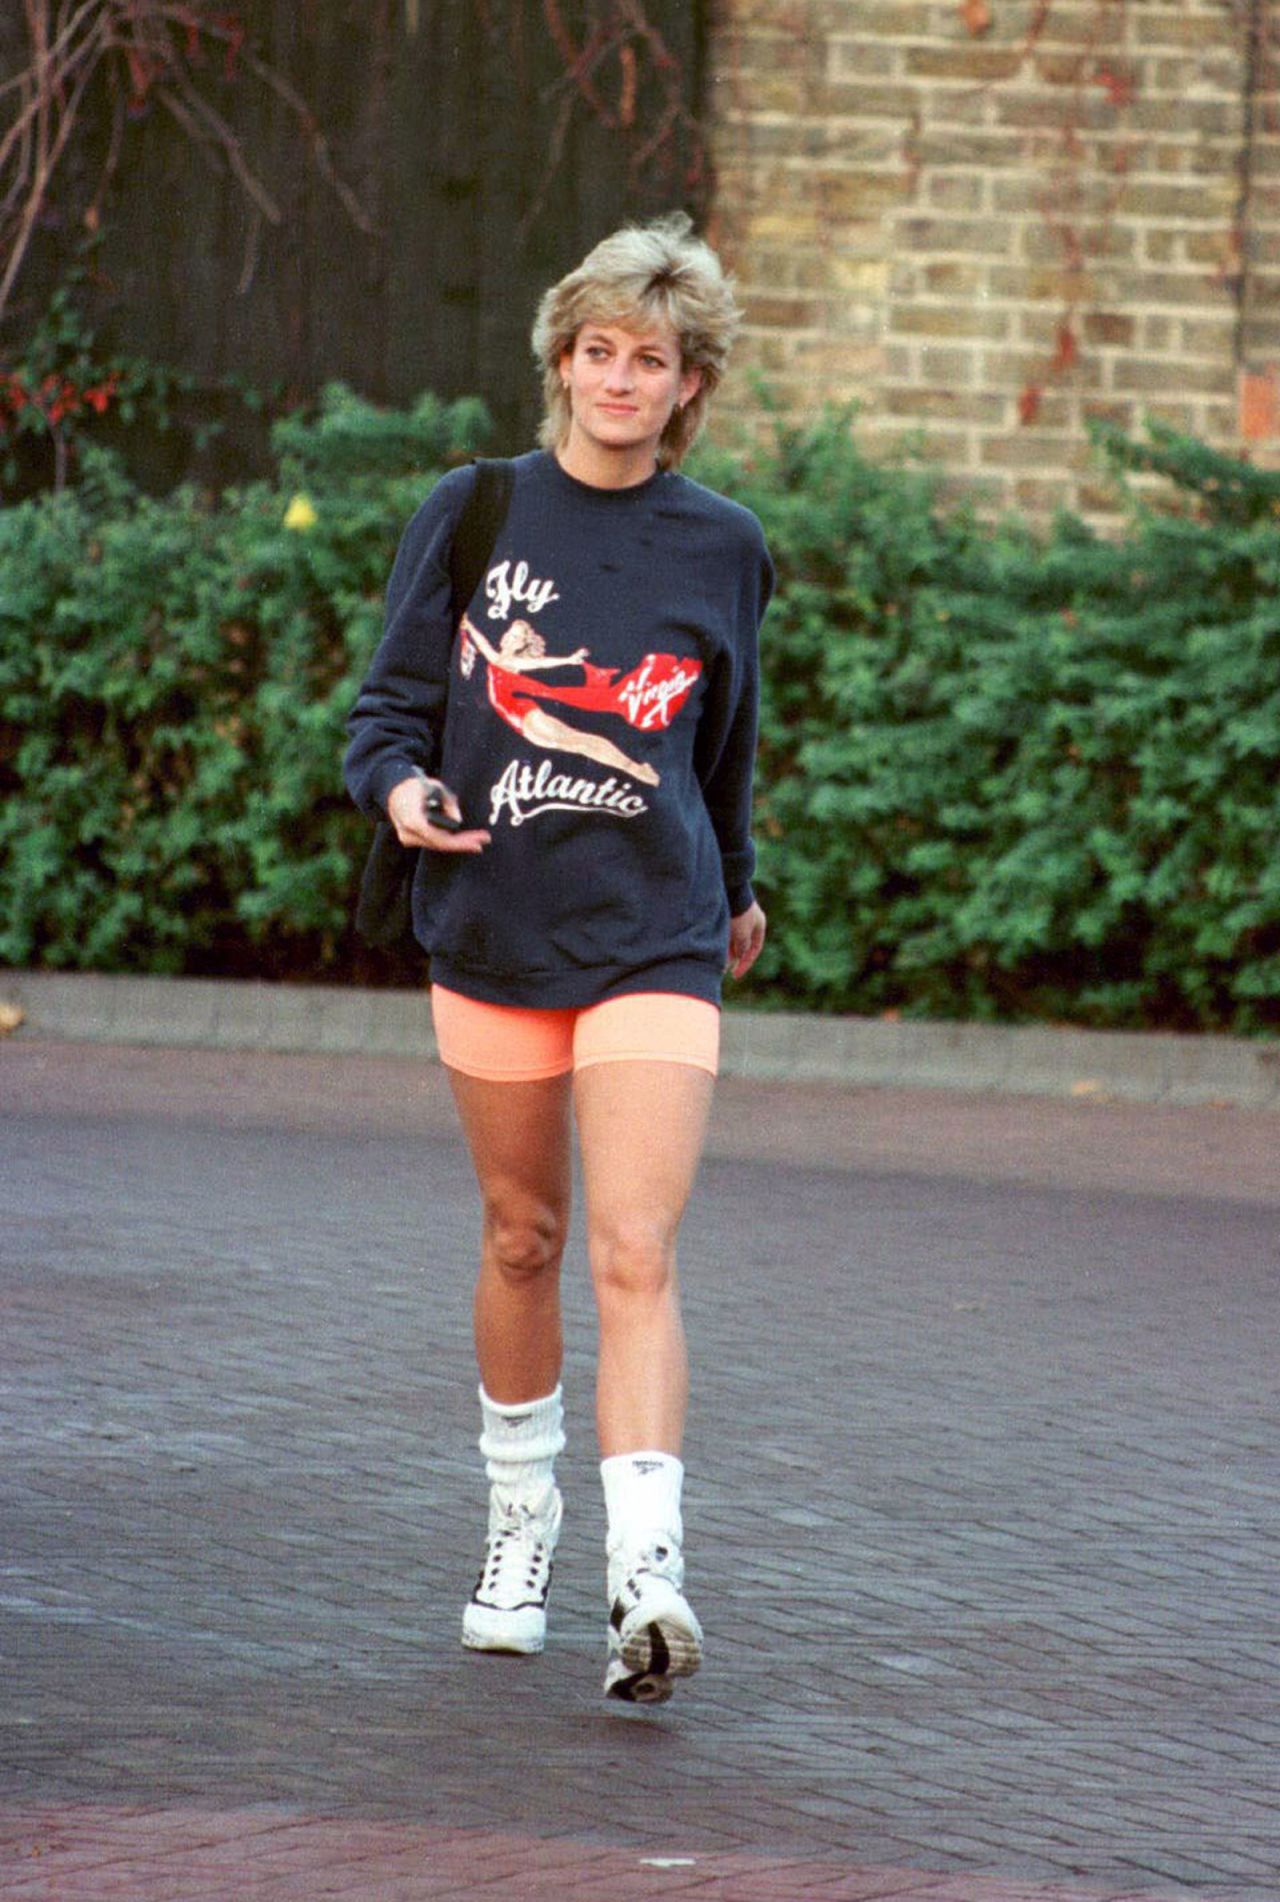 Princess Diana wearing a Virgin Atlantic sweater as she leaves the gym.